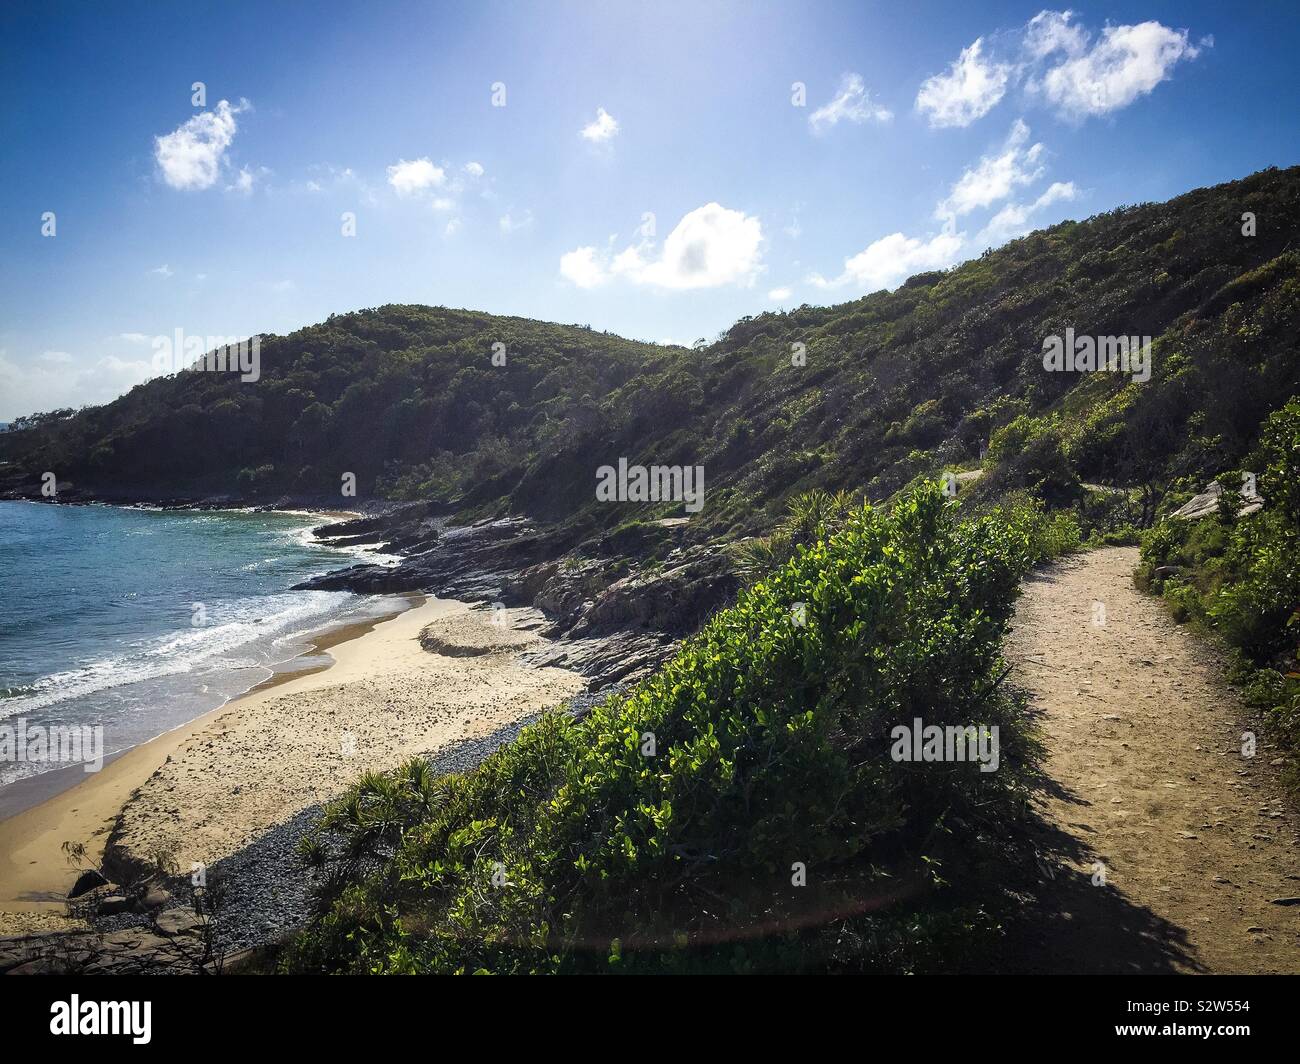 Walking through the forest on a beach track in Noosa National Park on the Sunshine Coast, Queensland, one of Australia’s most popular holiday destinations Stock Photo